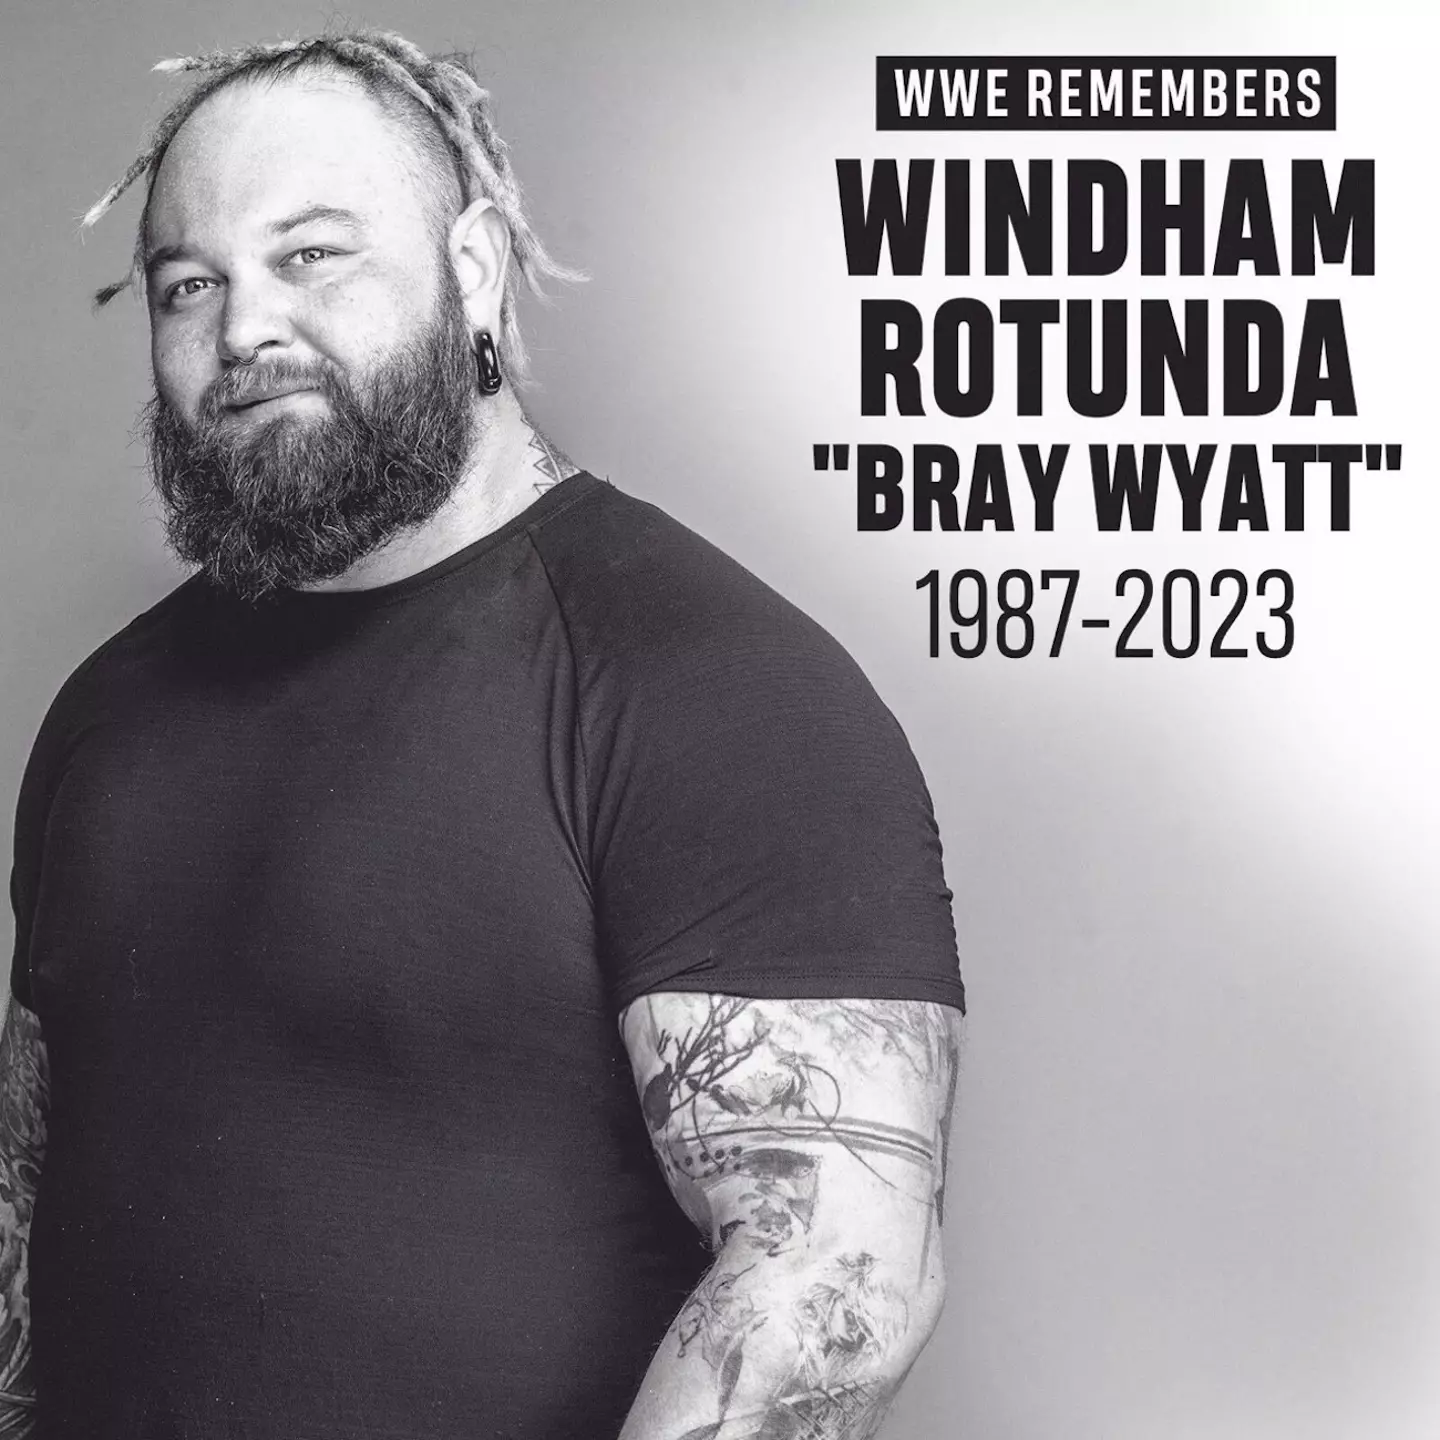 WWE star Bray Wyatt suddenly passed away on Thursday, August 24 at the age of 36.